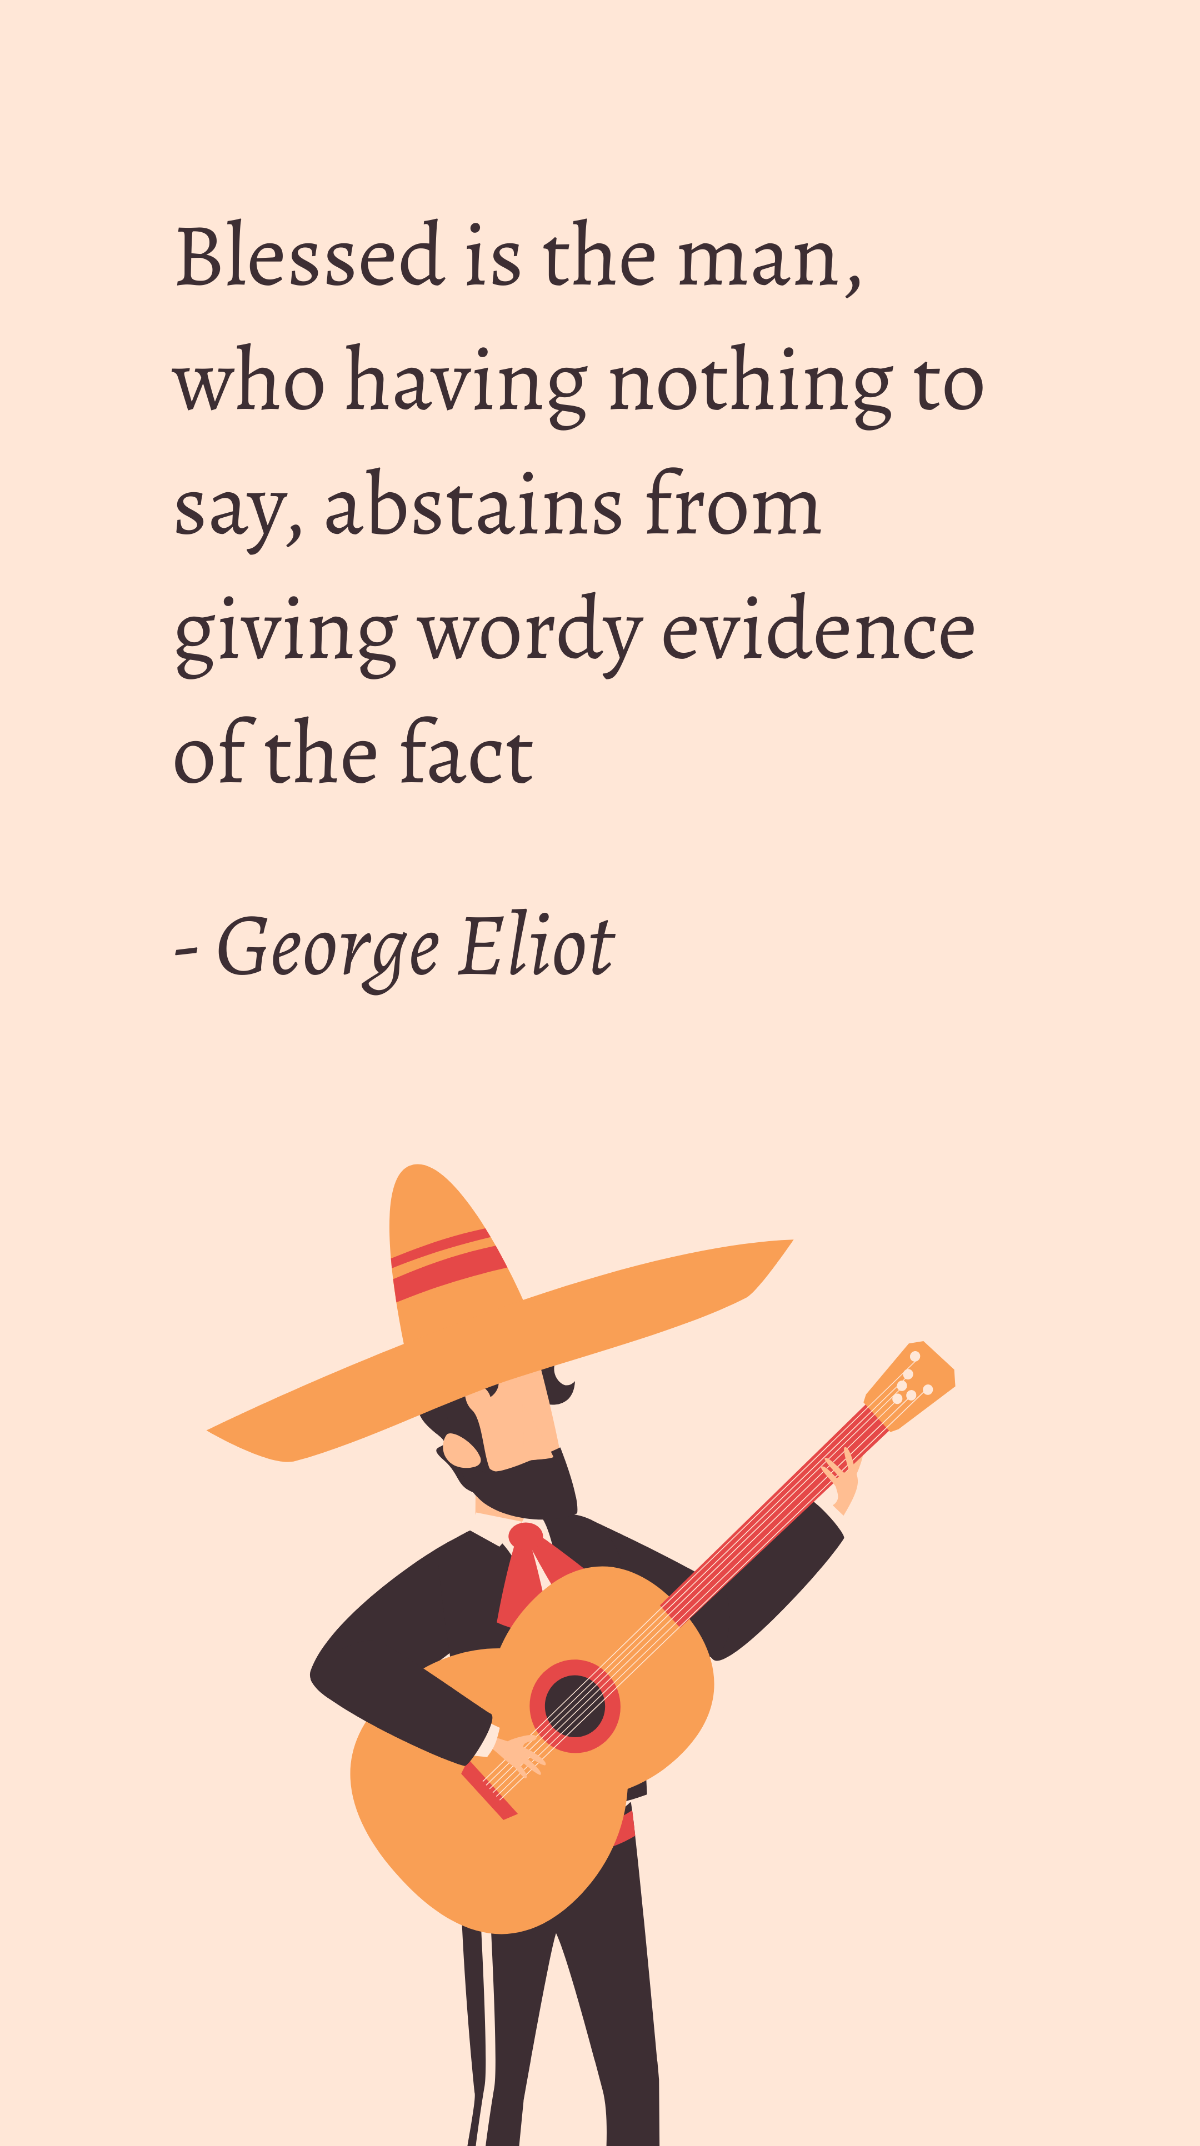 George Eliot - Blessed is the man, who having nothing to say, abstains from giving wordy evidence of the fact Template